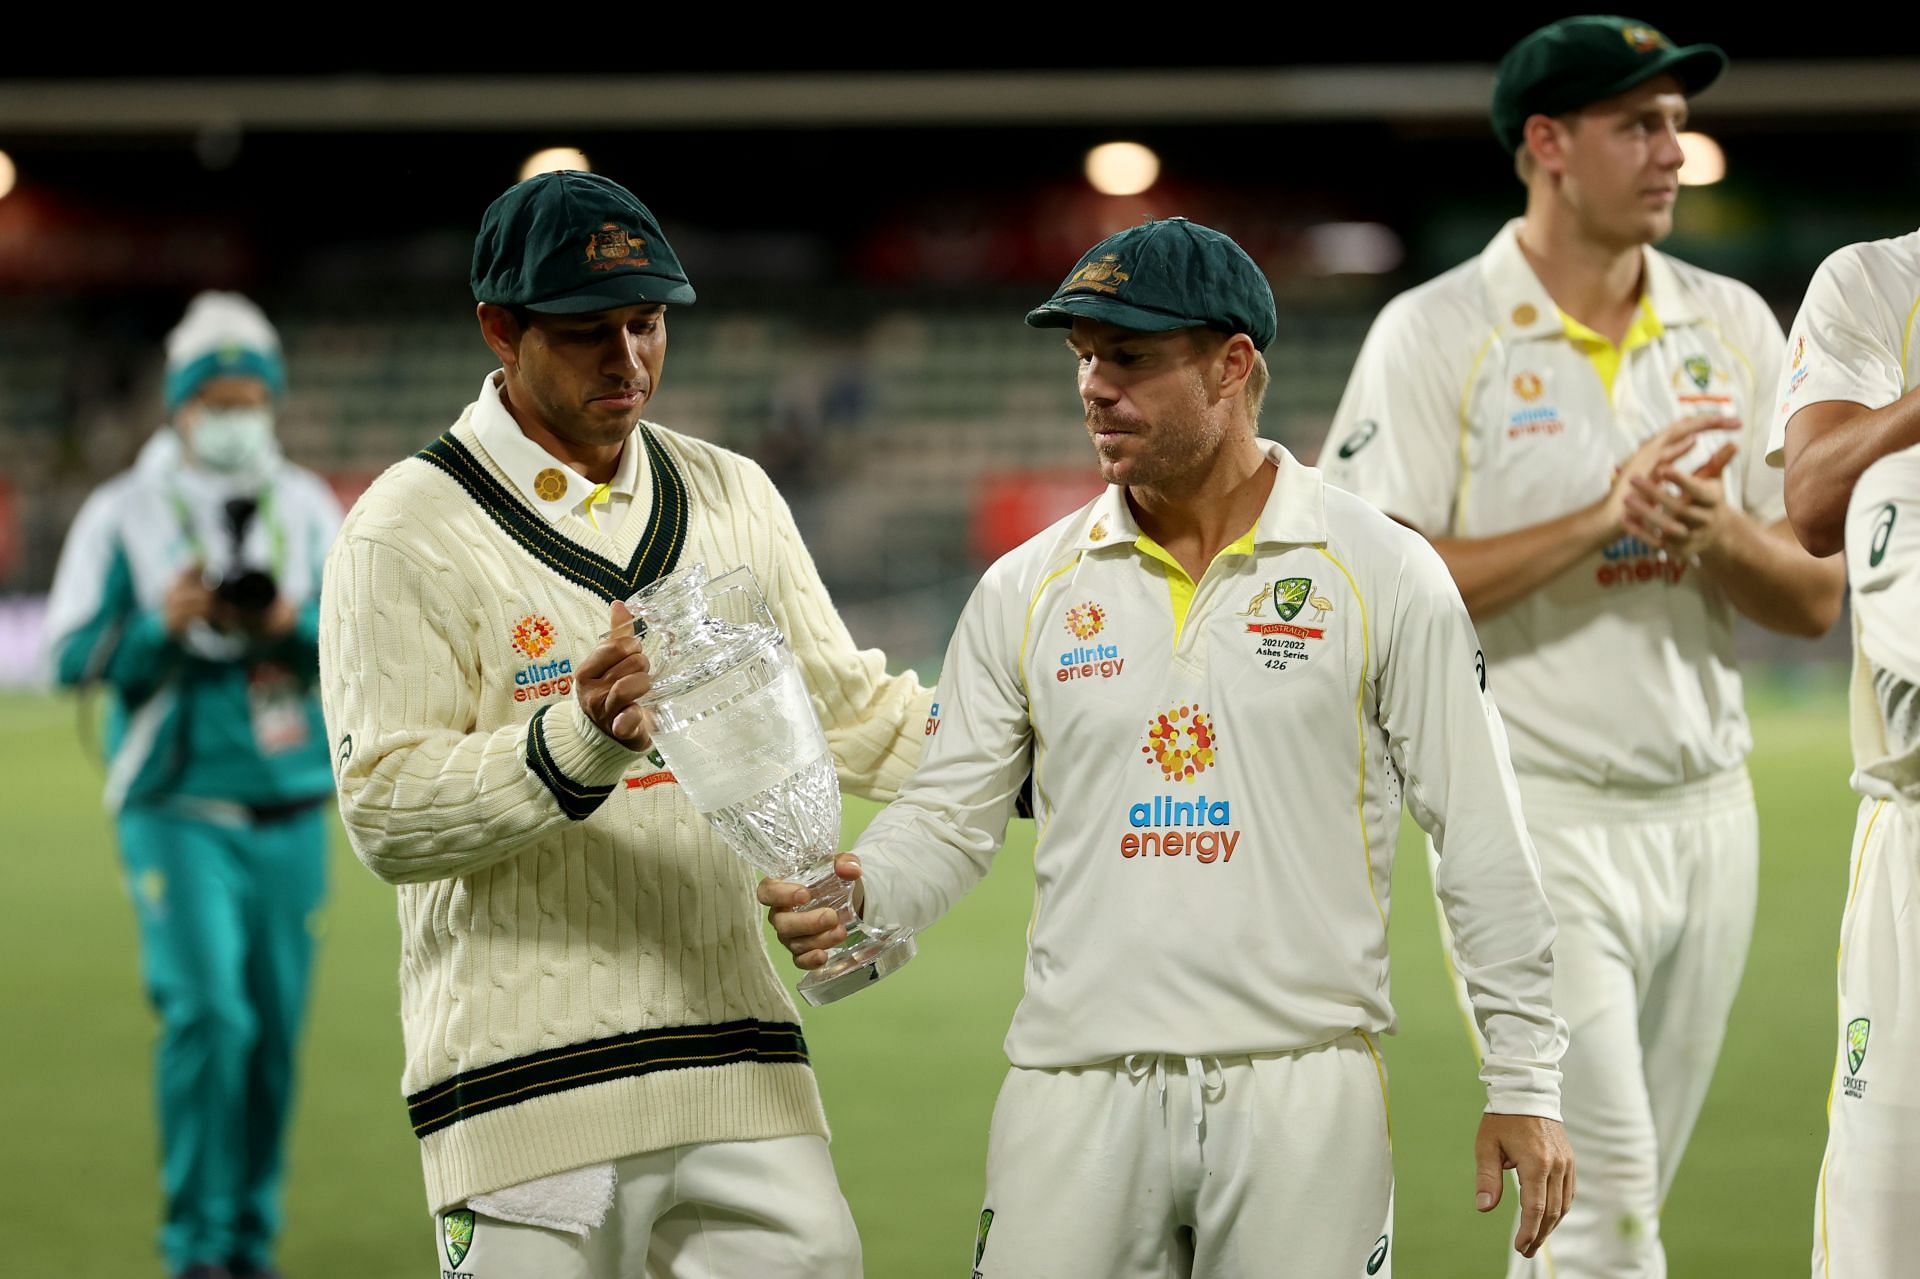 Steve Smith and David Warner (right) were handed leadership bans in 2018